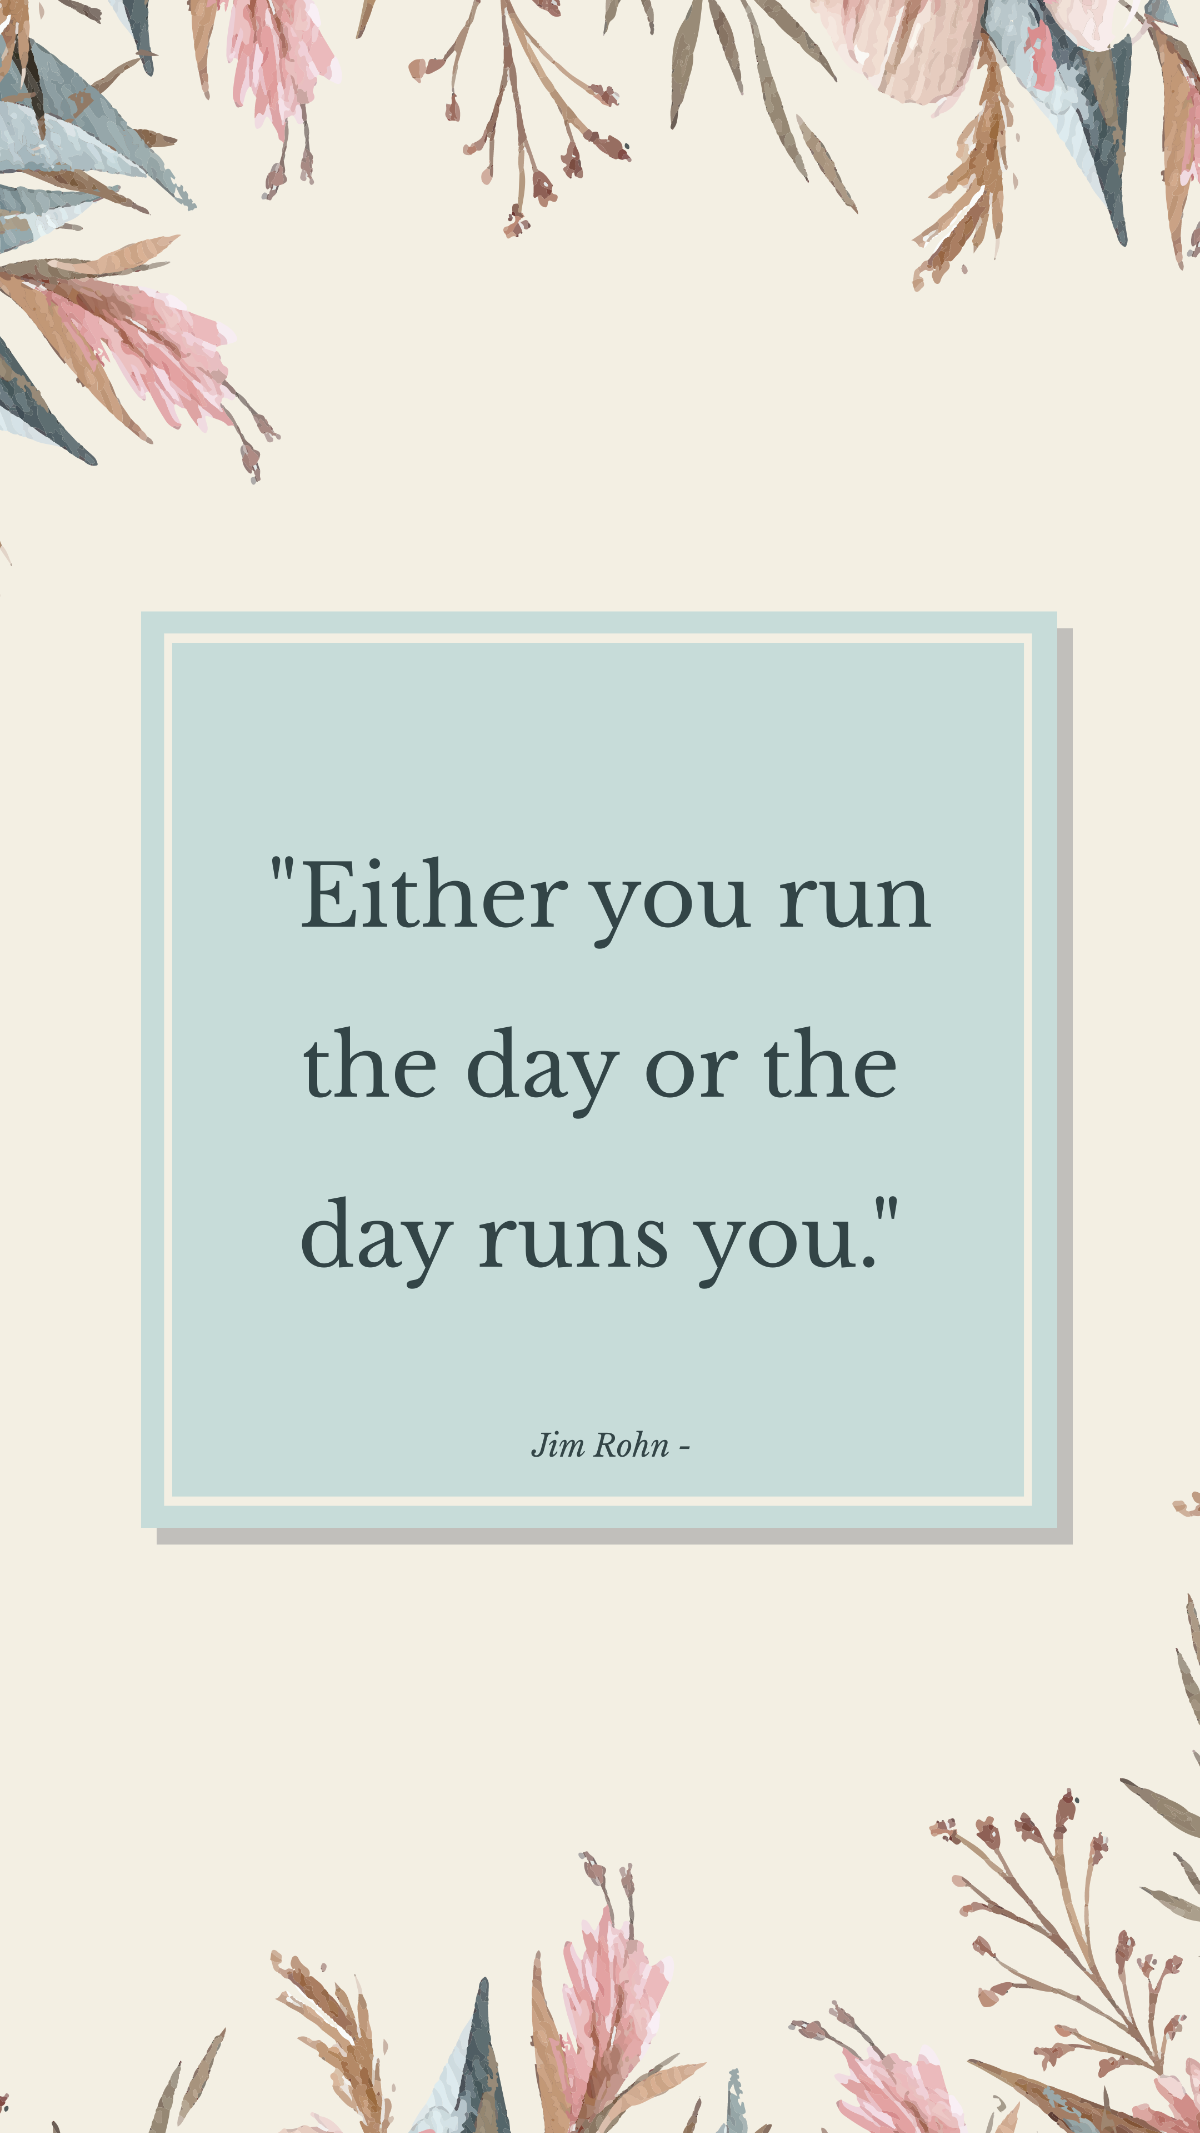 Jim Rohn - Either you run the day or the day runs you.